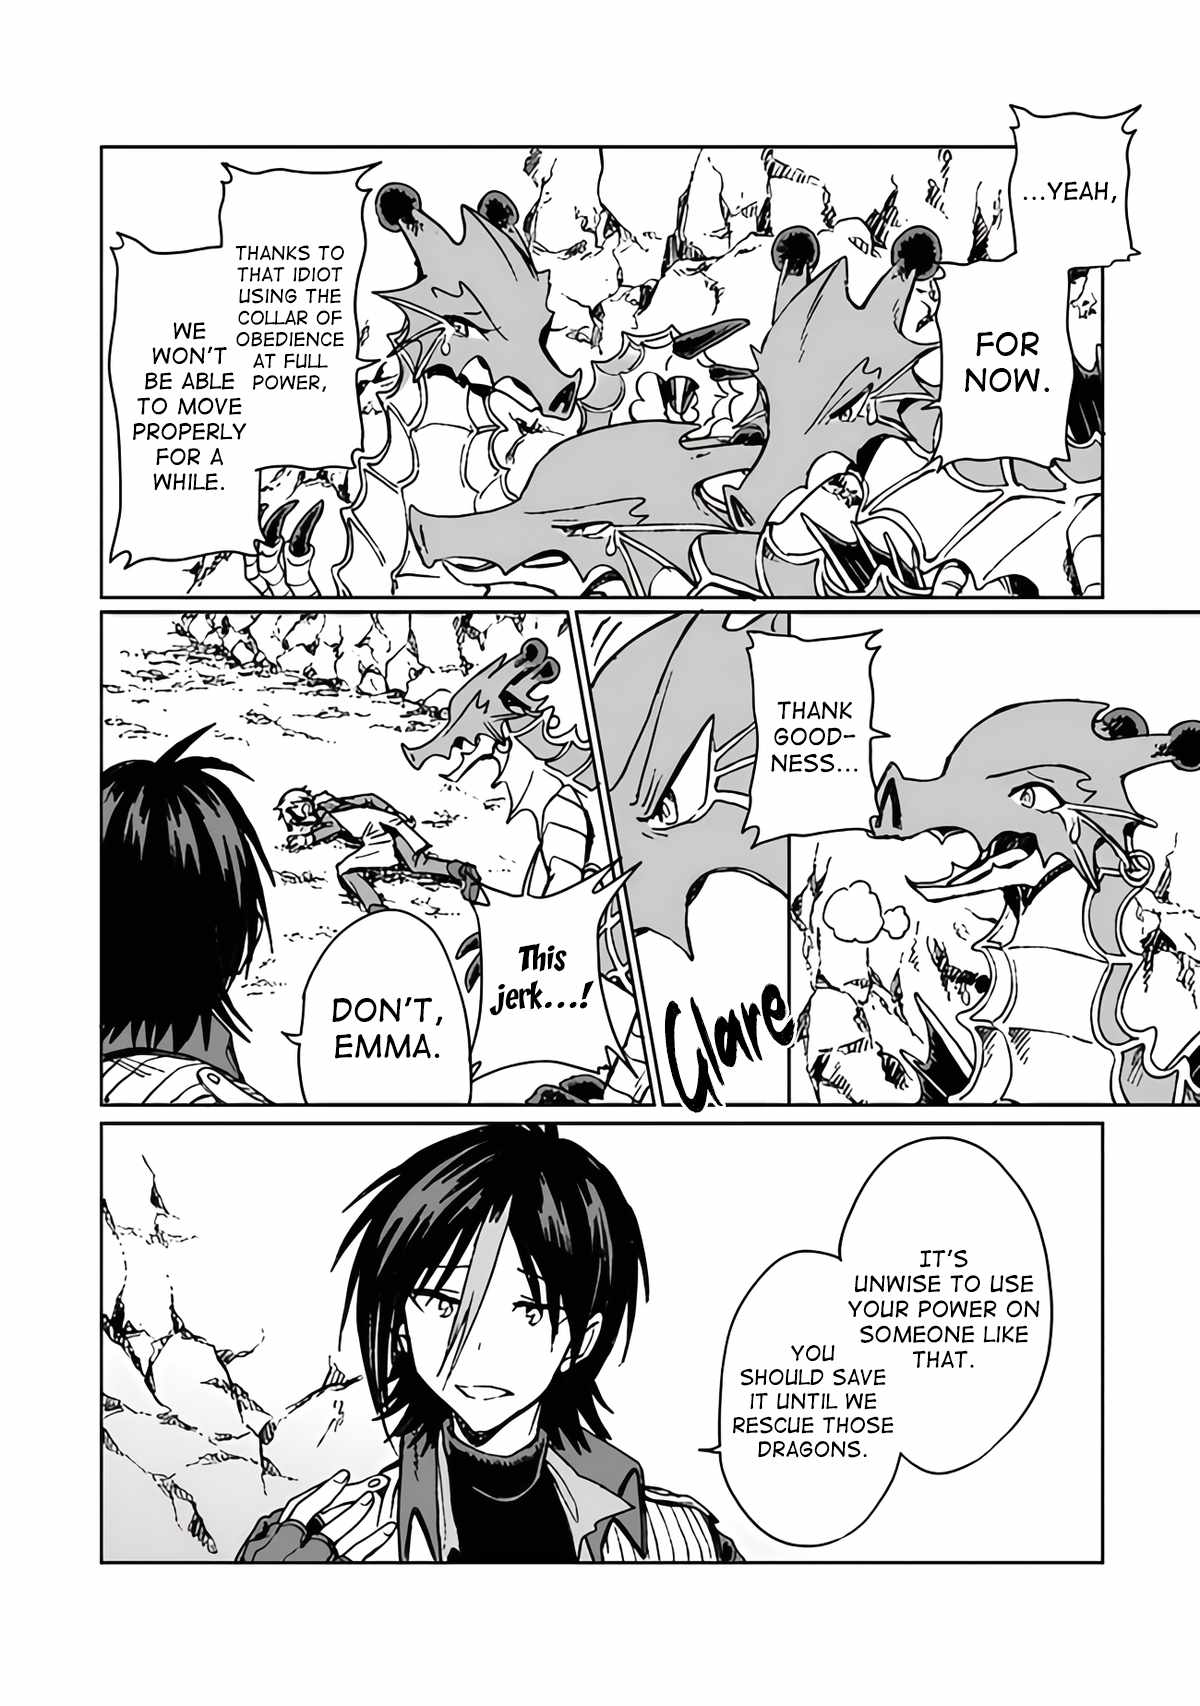 read I've Been Kicked Out of an S-Rank Guild. But Only I Can Communicate With Dragons. Before I Knew It, I Became the Greatest Dragon Knight Chapter 20 Manga Online Free at Mangabuddy, MangaNato,Manhwatop | MangaSo.com